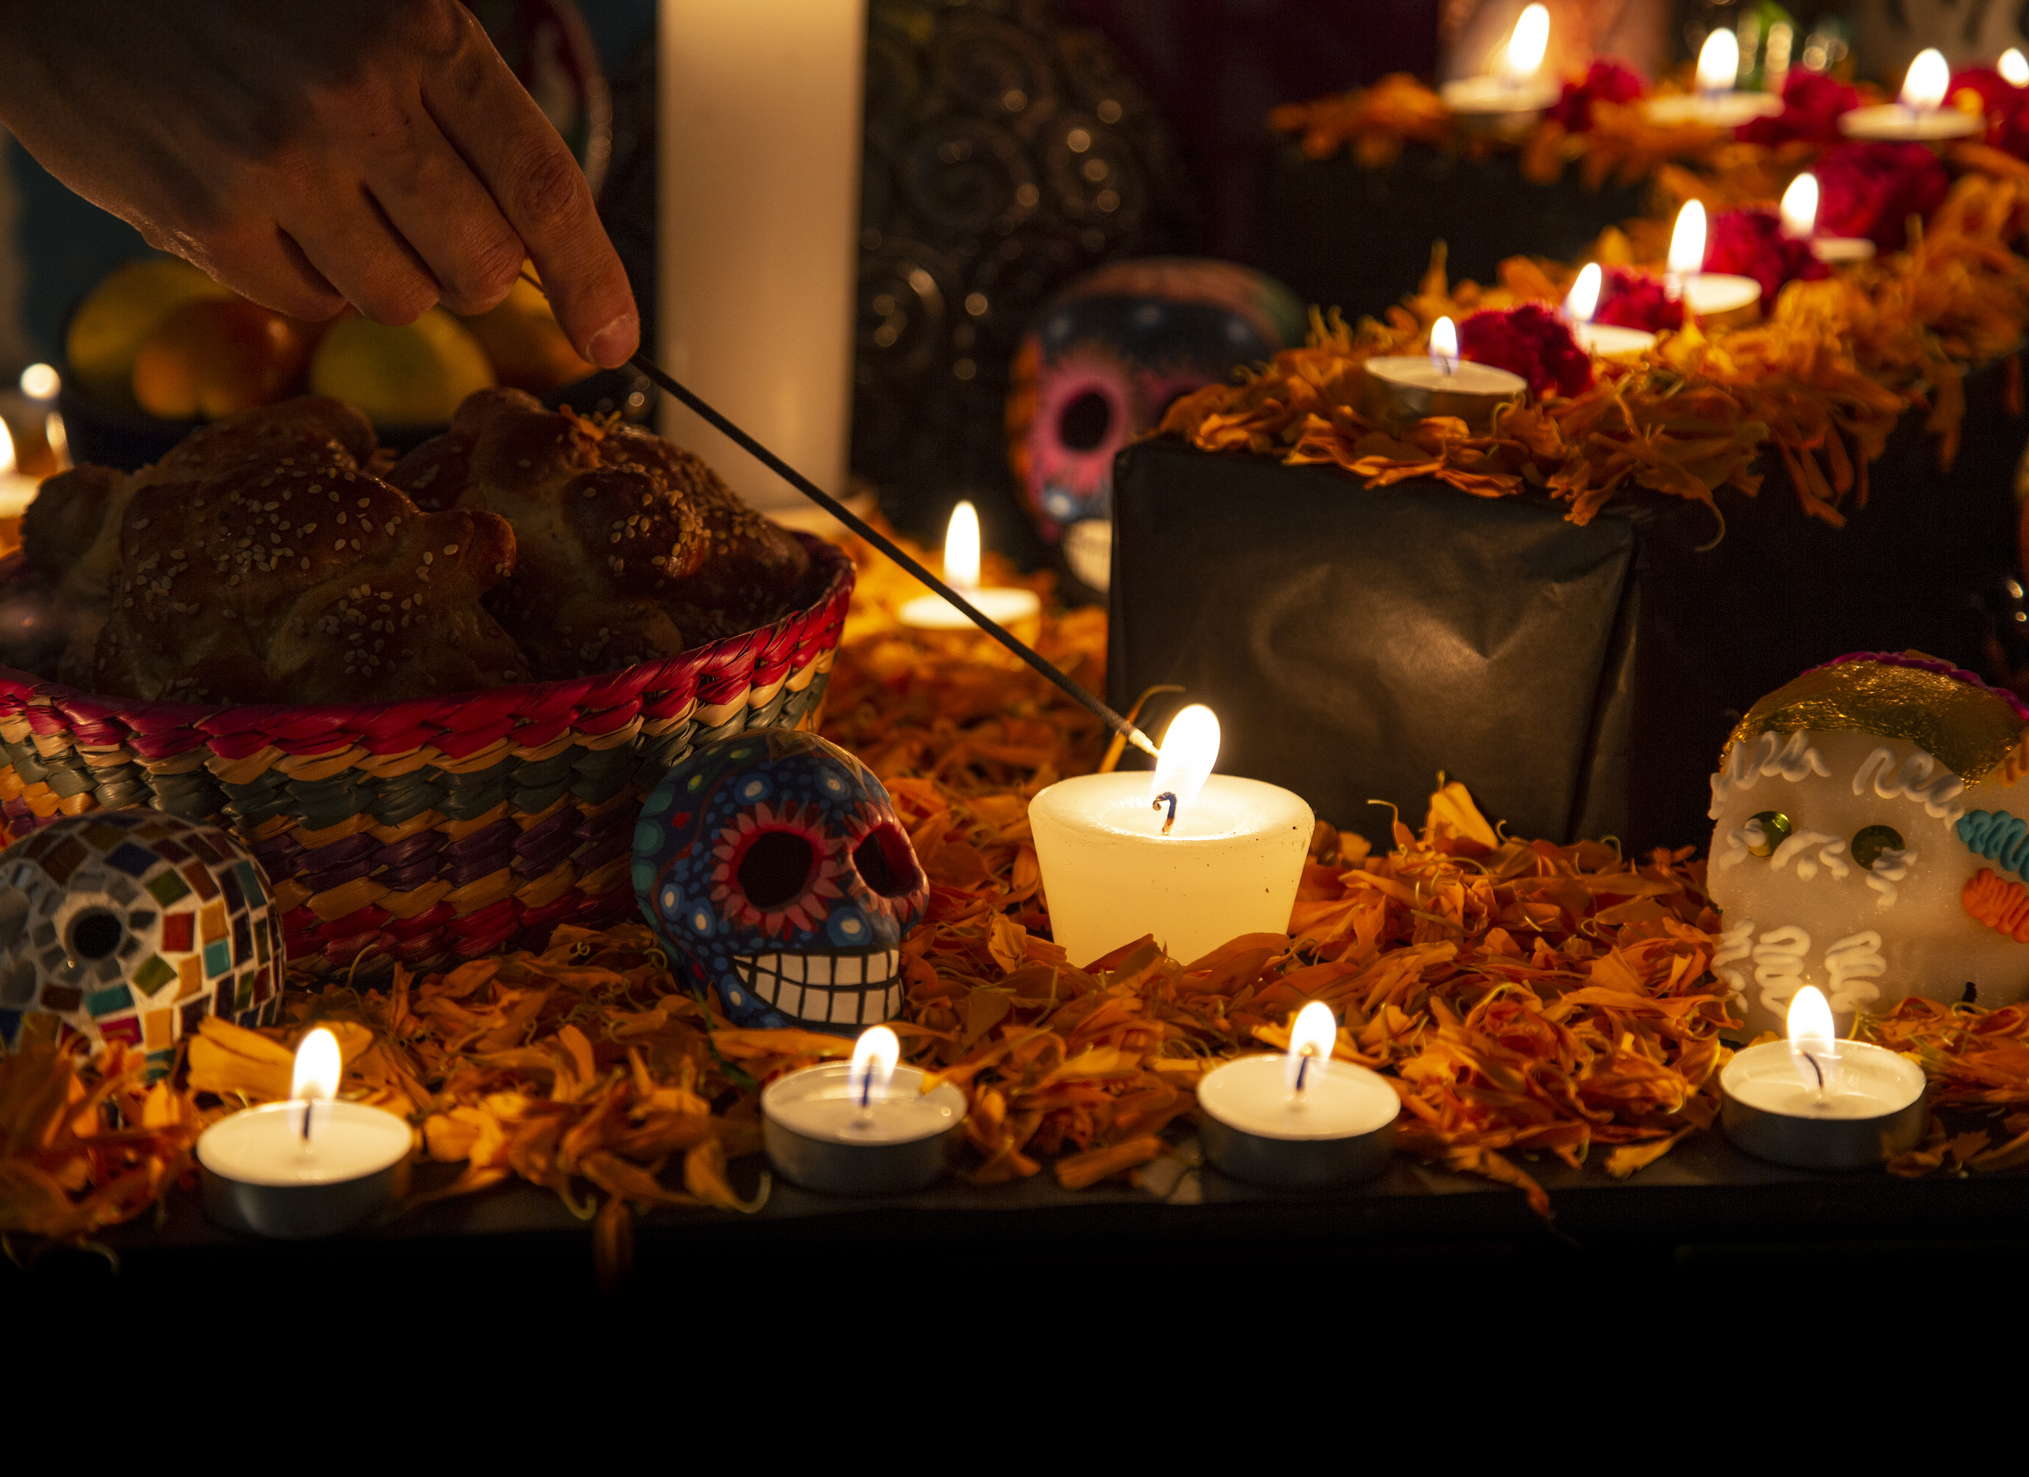 Hand holding incense stick over "ofrenda" for the Day of the Dead in Puebla, Pue., Mexico